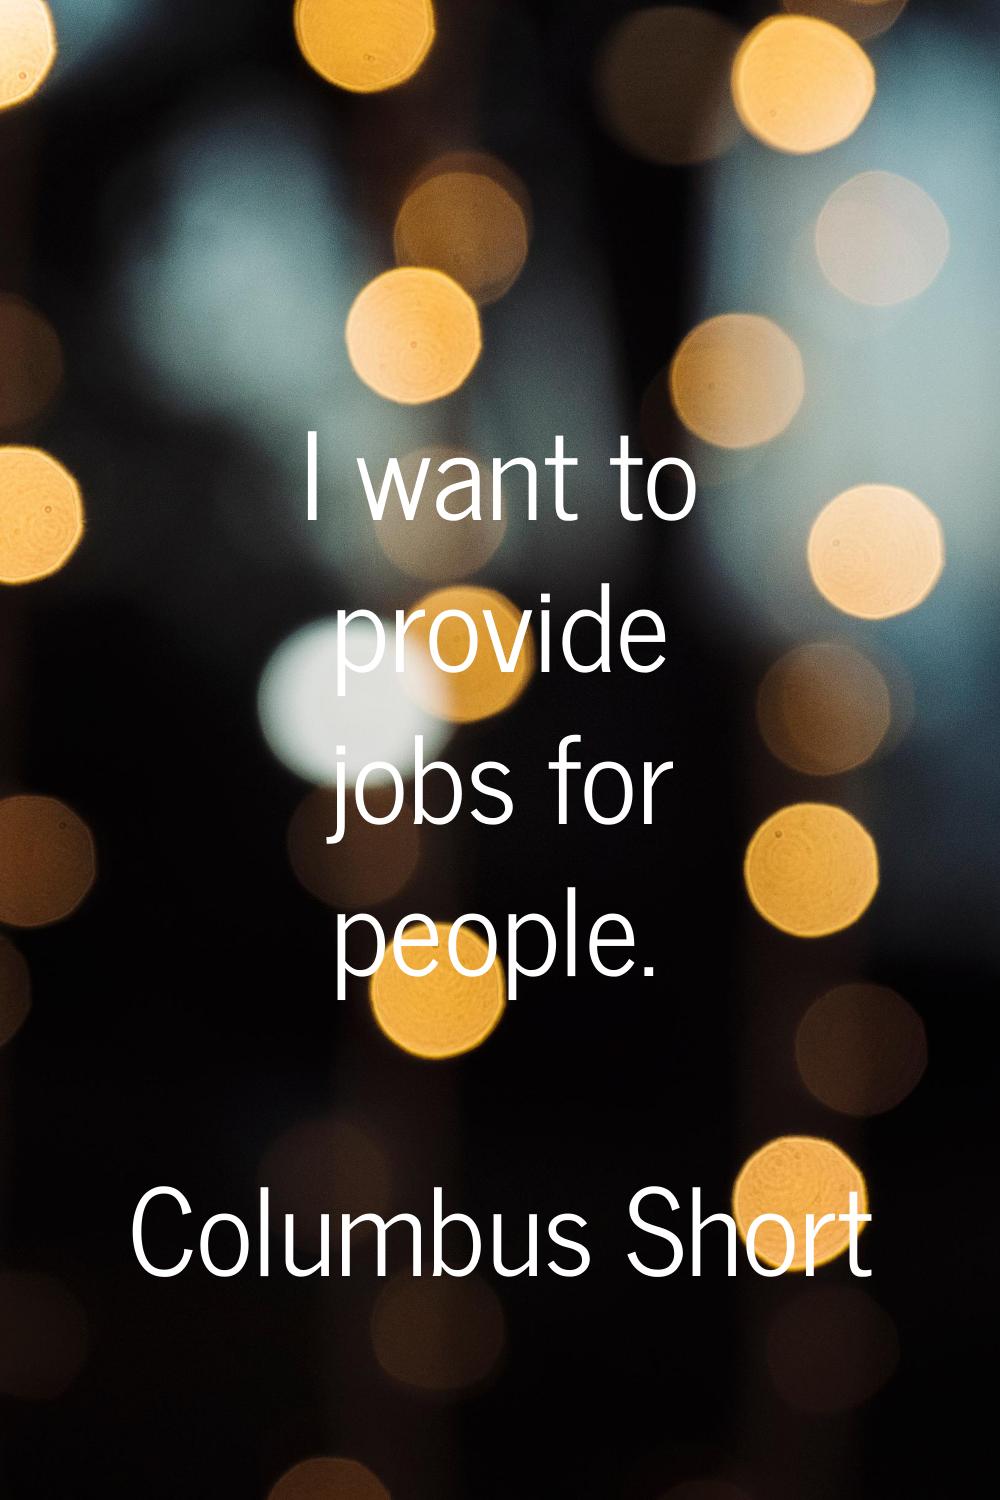 I want to provide jobs for people.